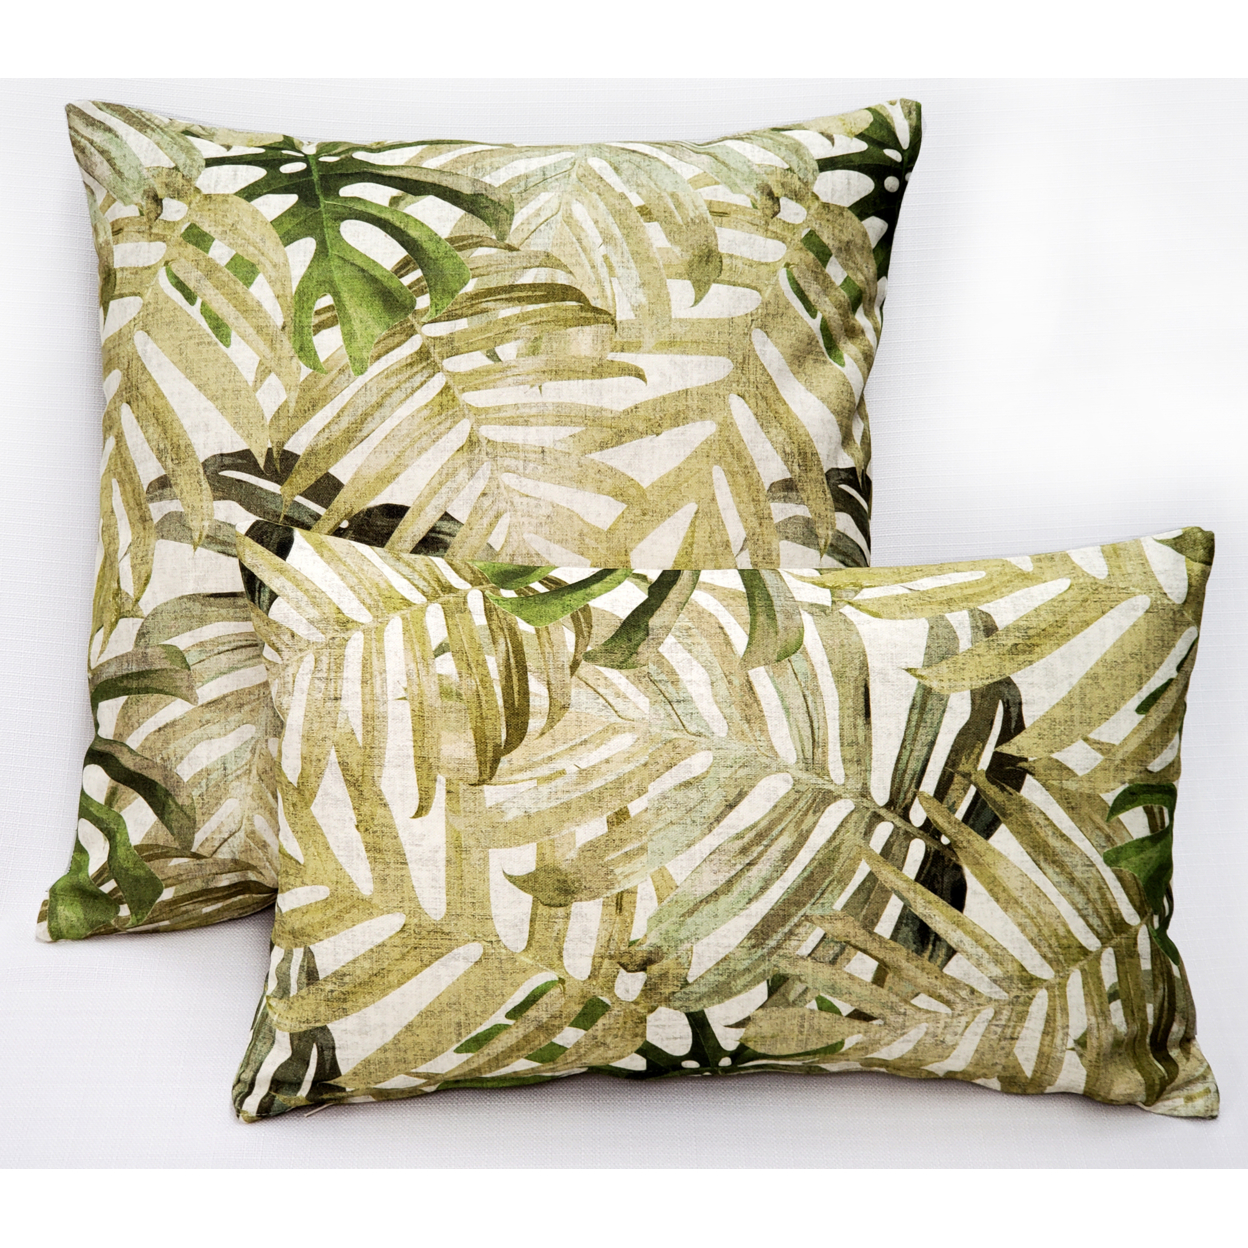 Pattaya Green Palm Throw Pillow 20x20 Inches Square, Complete Pillow With Polyfill Pillow Insert